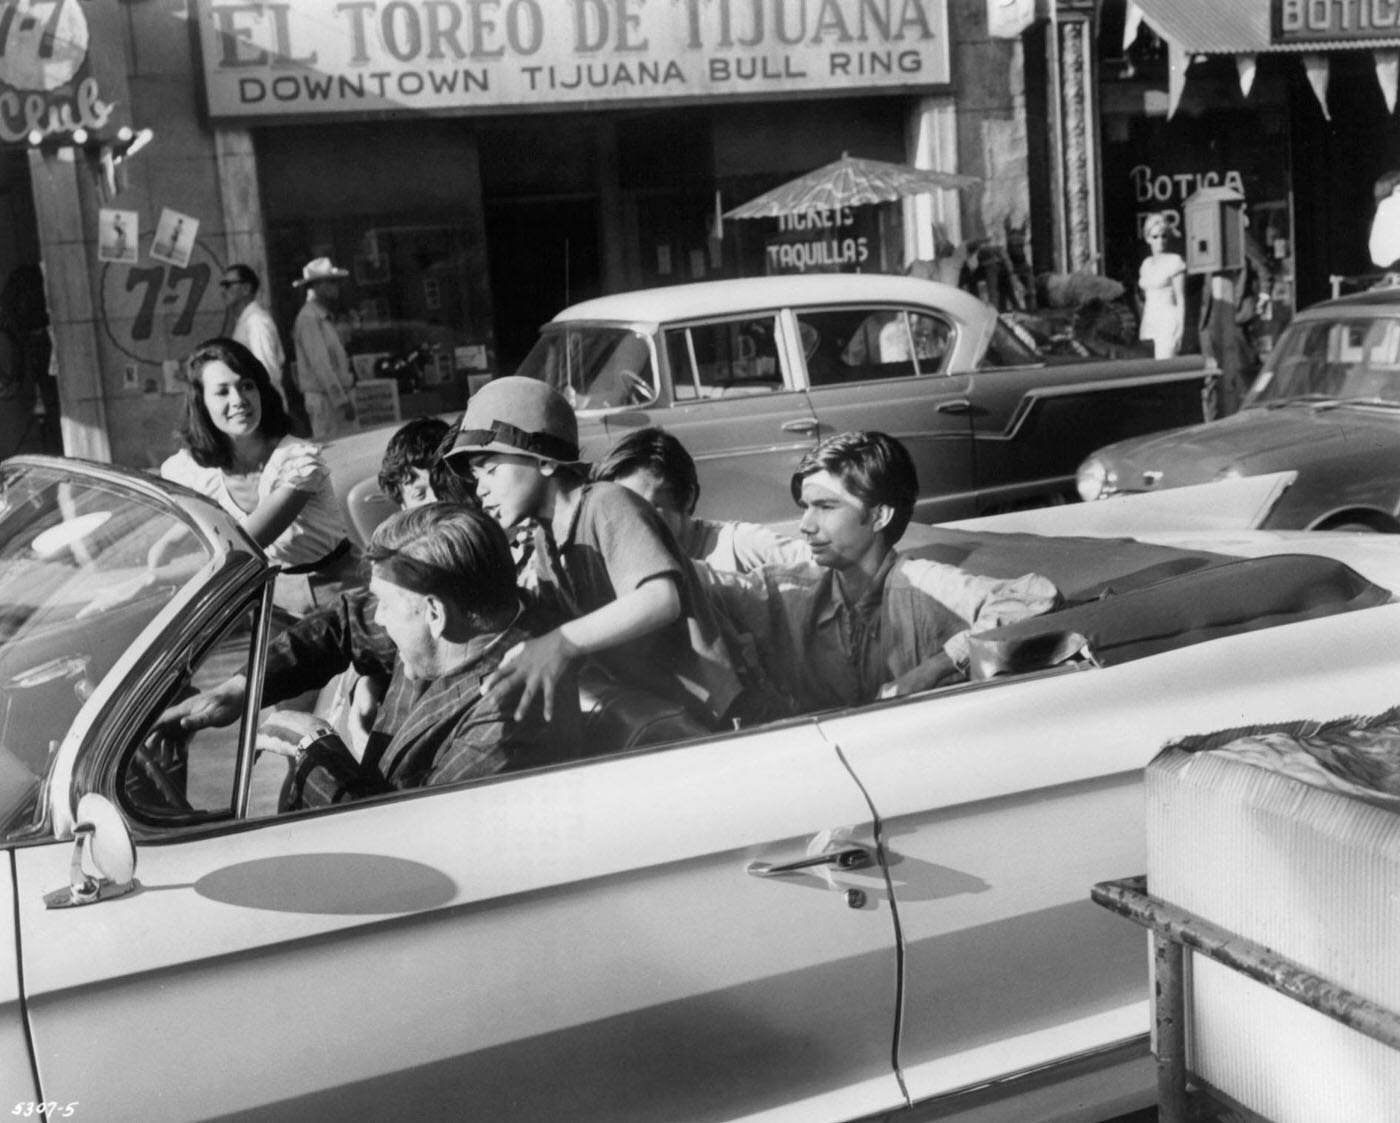 Crowd of actors in a convertible automobile riding down a street in downtown Tijuana in a scene from the film 'Dime With A Halo', 1963.